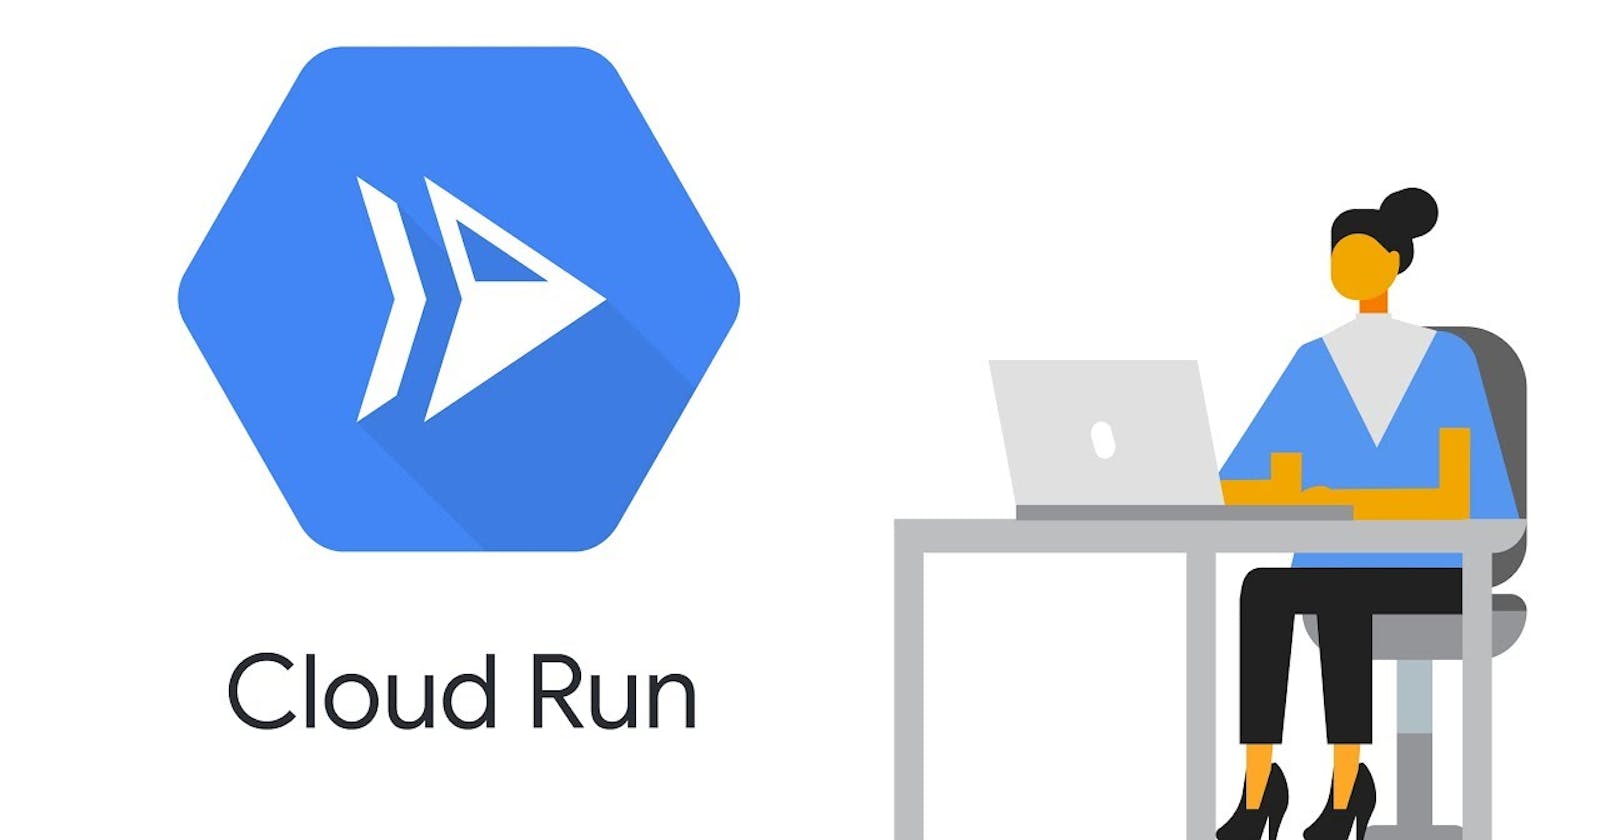 Continuous Deployment to Cloud Run Services based on a New Container Image.